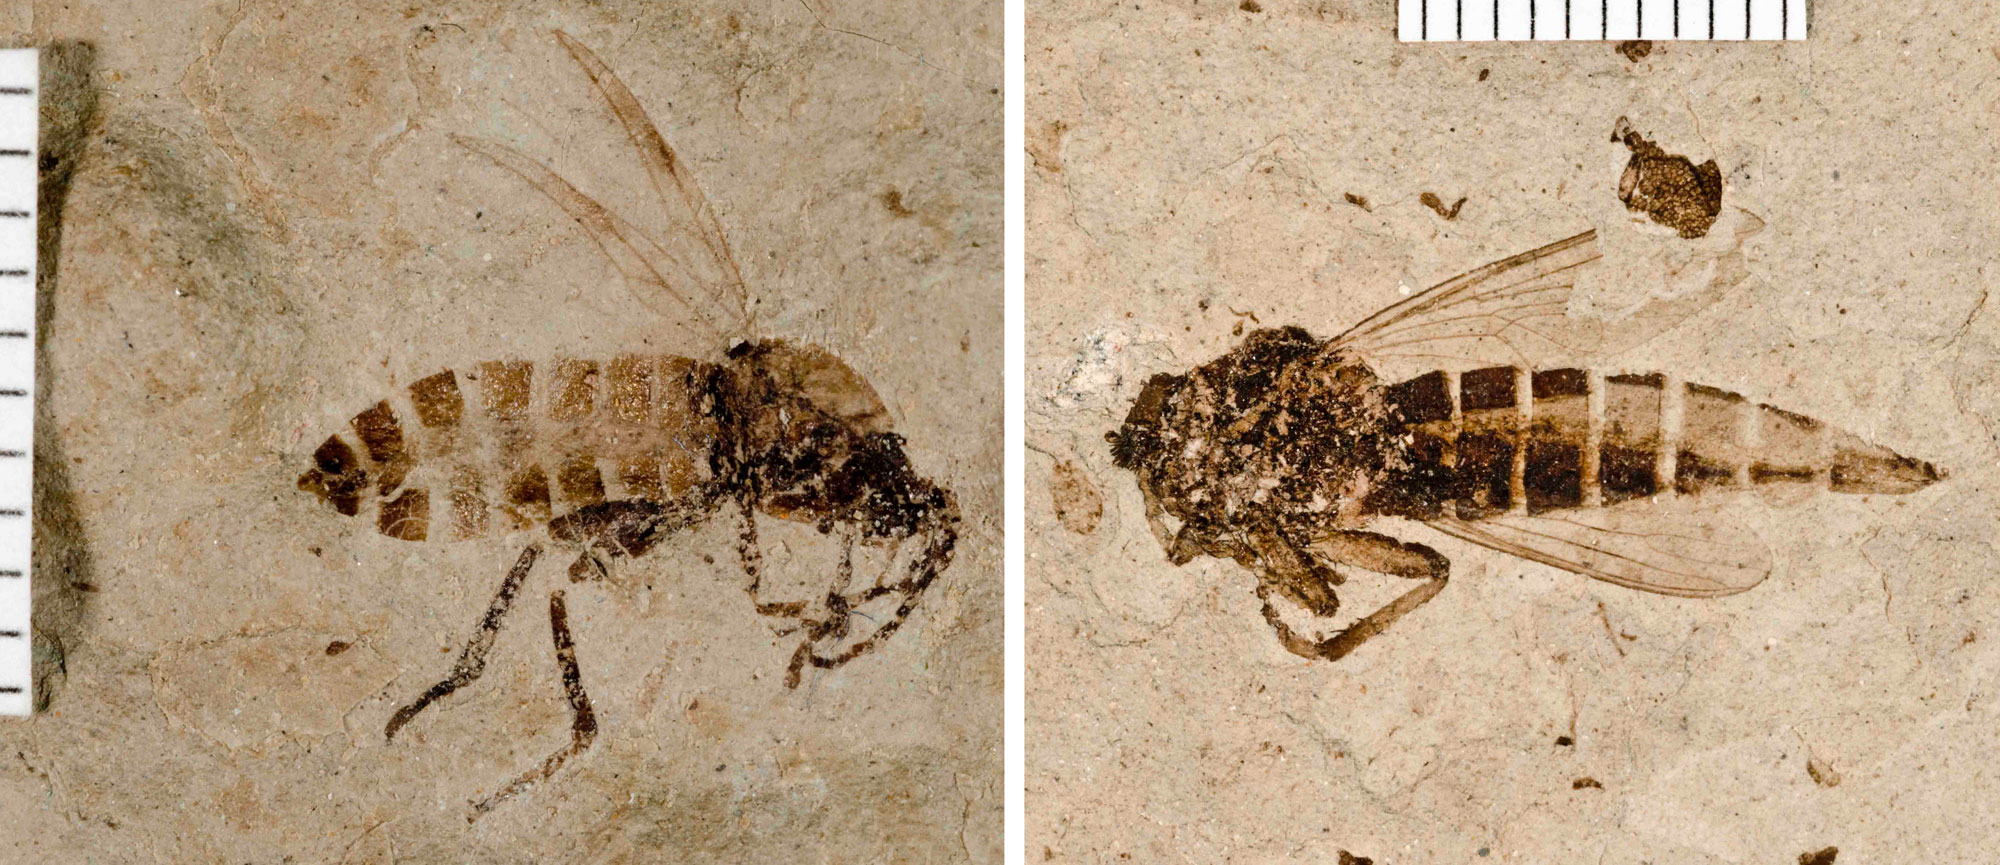 2-panel image showing photos of flies from the Eocene of Florissant, Colorado. Panel 1: A true fly in lateral (side view). The wings are extended from the back of the body and two of the legs are clearly hanging down. Panel 2: A robber fly in lateral (side) view. The legs are folded up and two wings can be seen. The body is elongated.